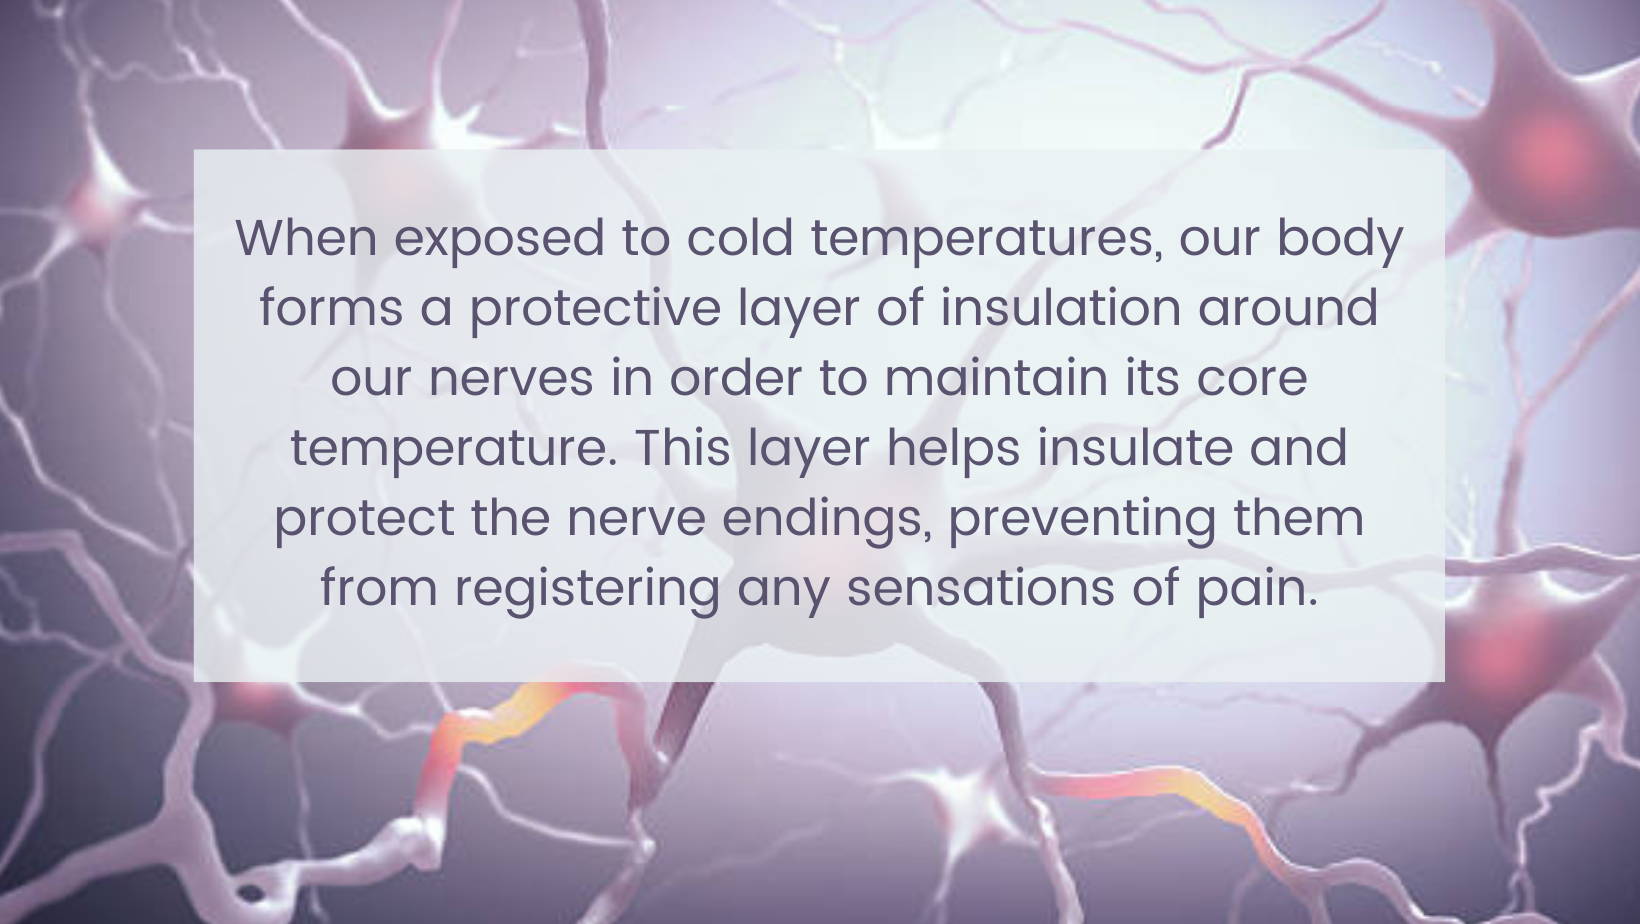 When exposed to cold temperatures, our body forms a protective layer of insulation around our nerves in order to maintain its core temperature. This layer helps insulate and protect the nerve endings, preventing them from registering any sensations of pain.